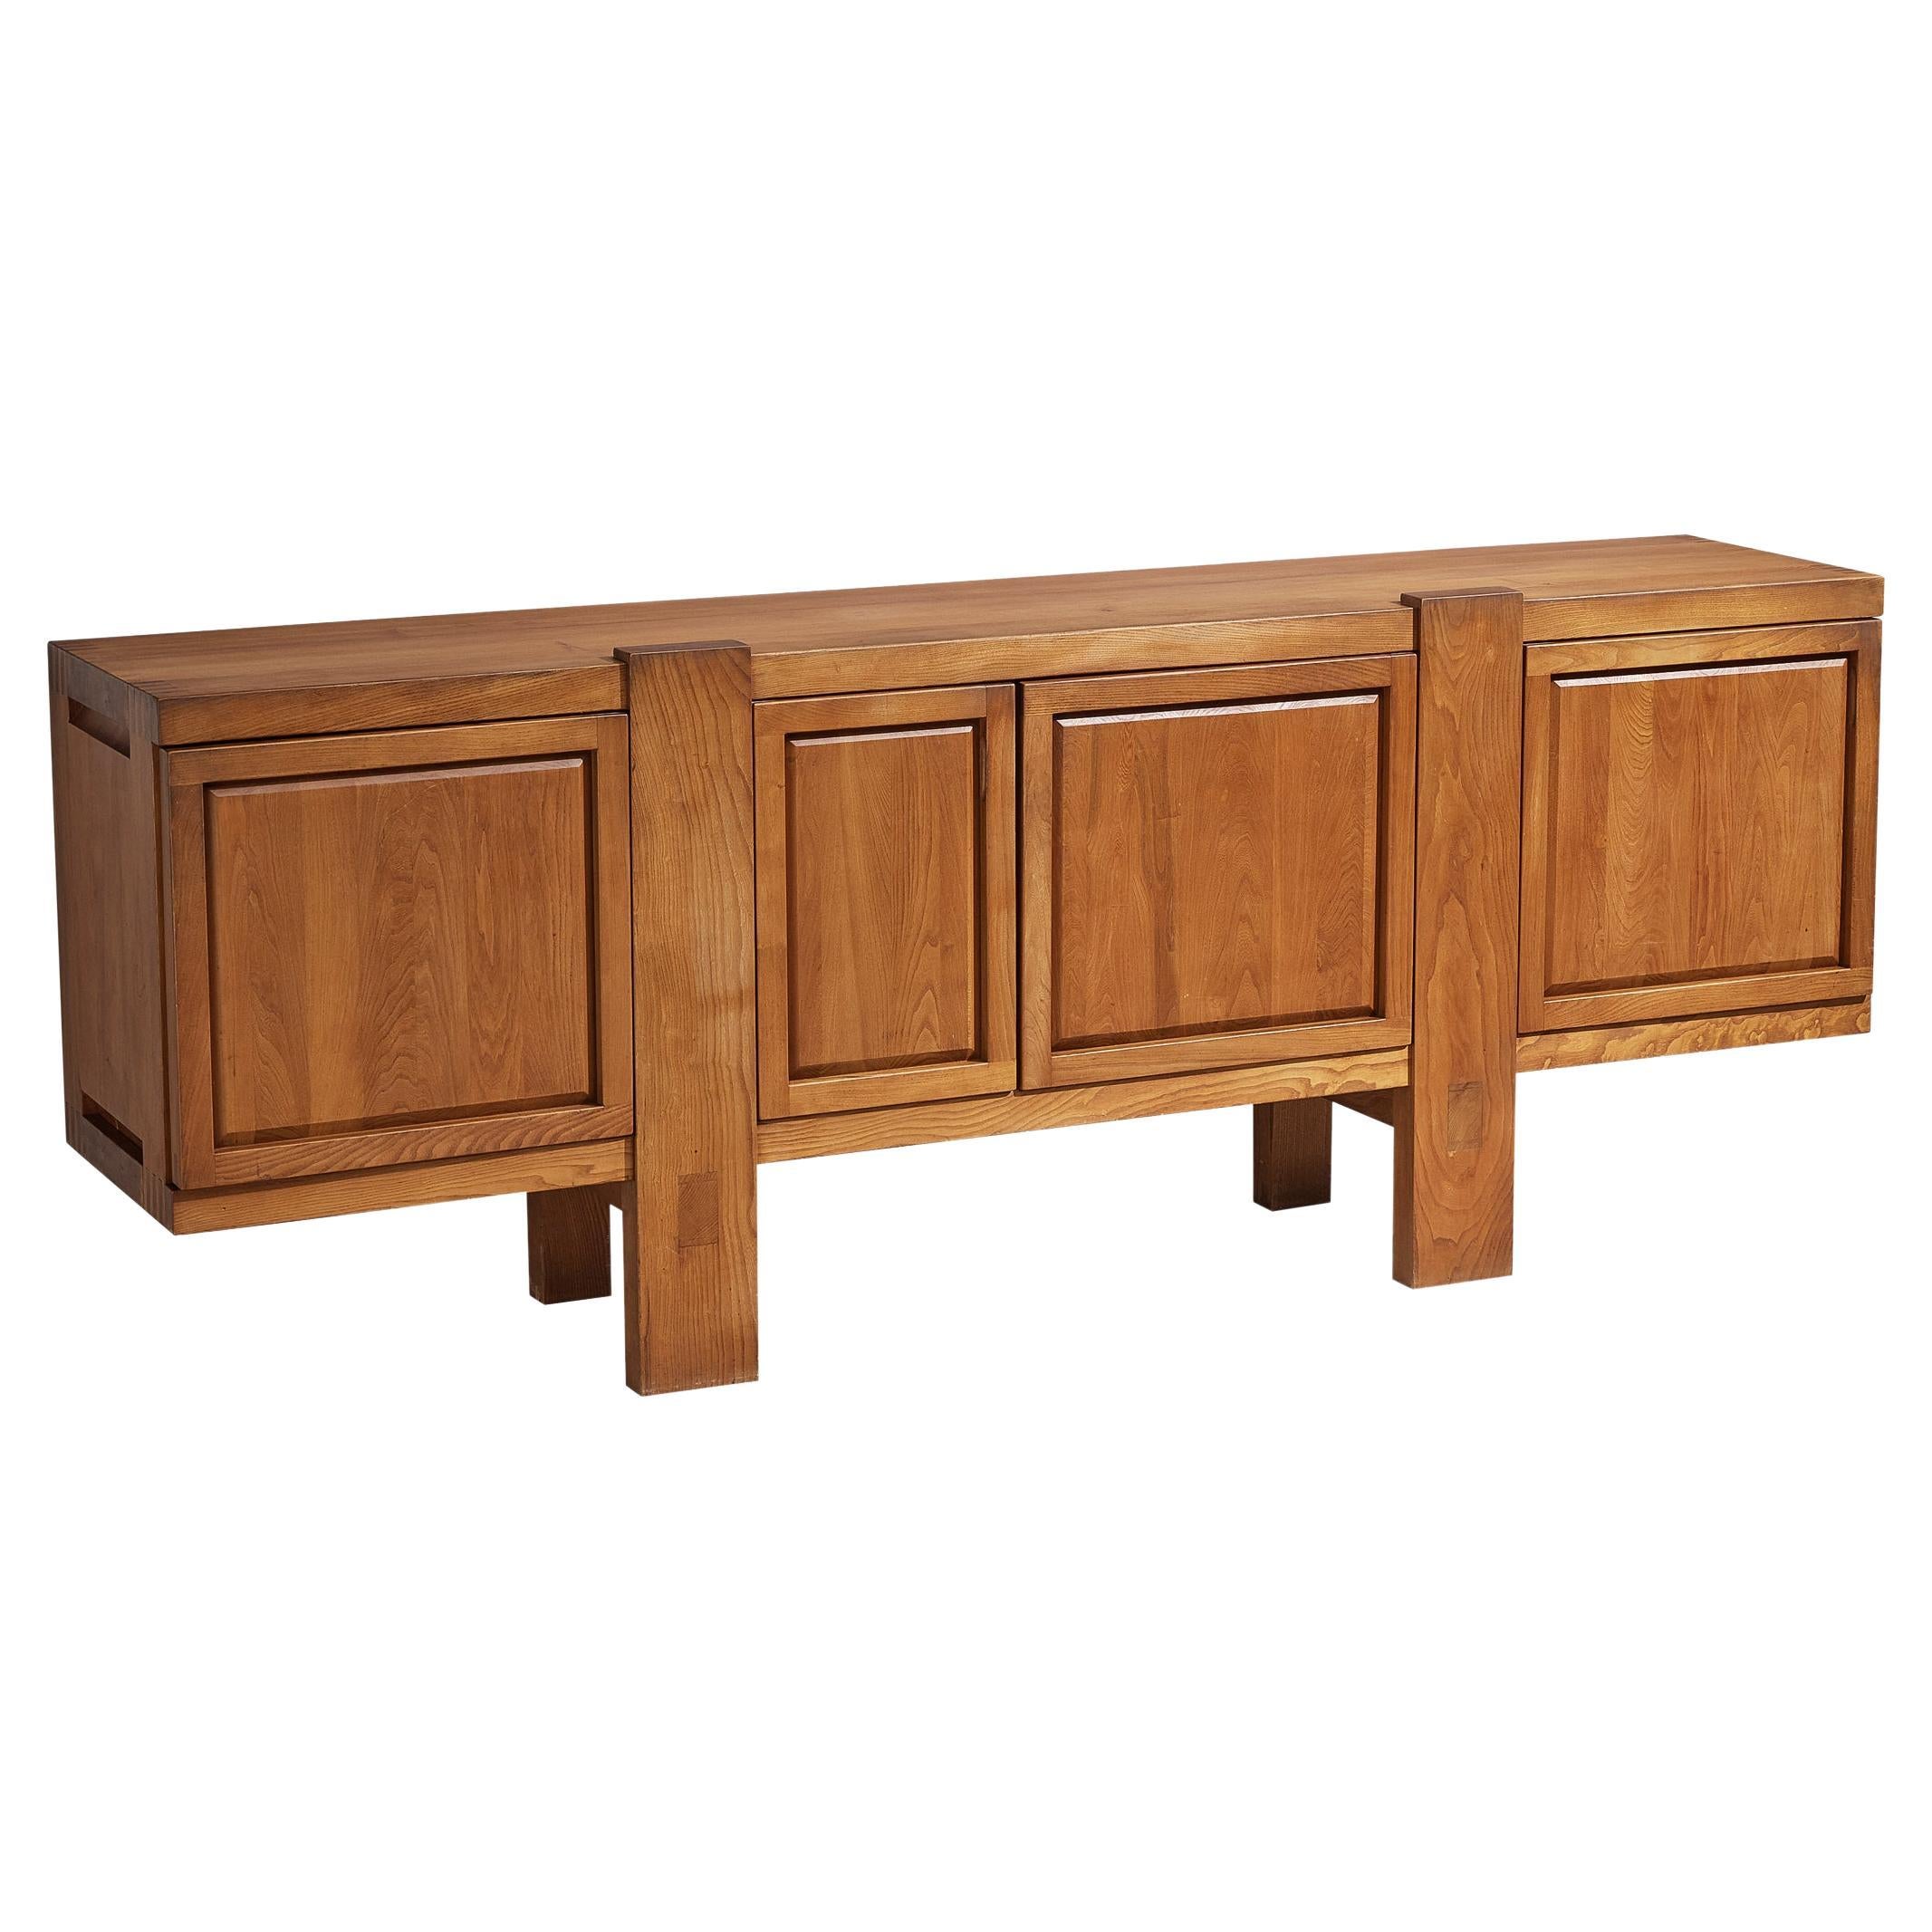 Early Pierre Chapo Large 'R16' Sideboard in Solid Elm